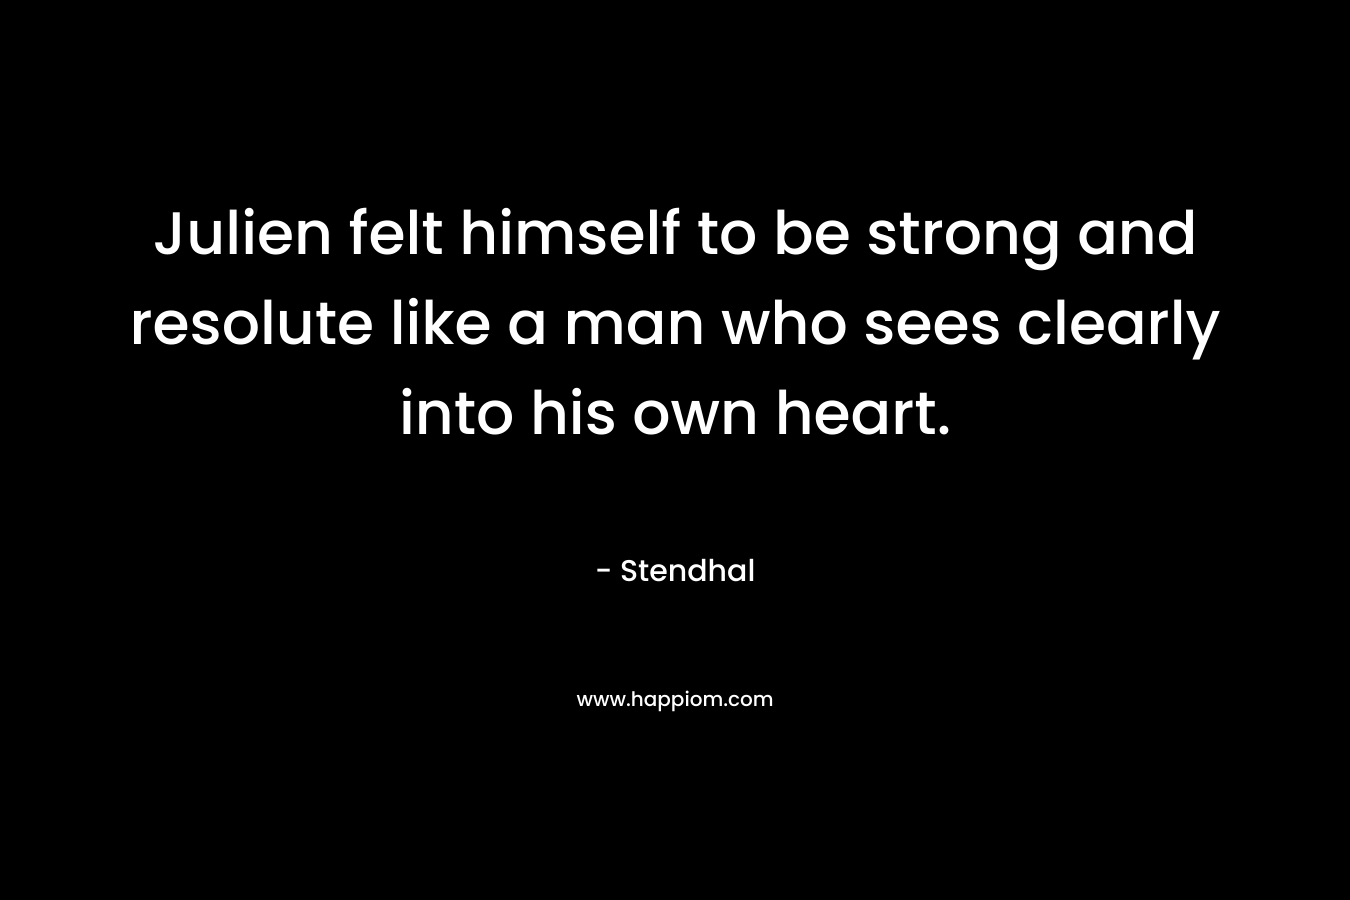 Julien felt himself to be strong and resolute like a man who sees clearly into his own heart. – Stendhal